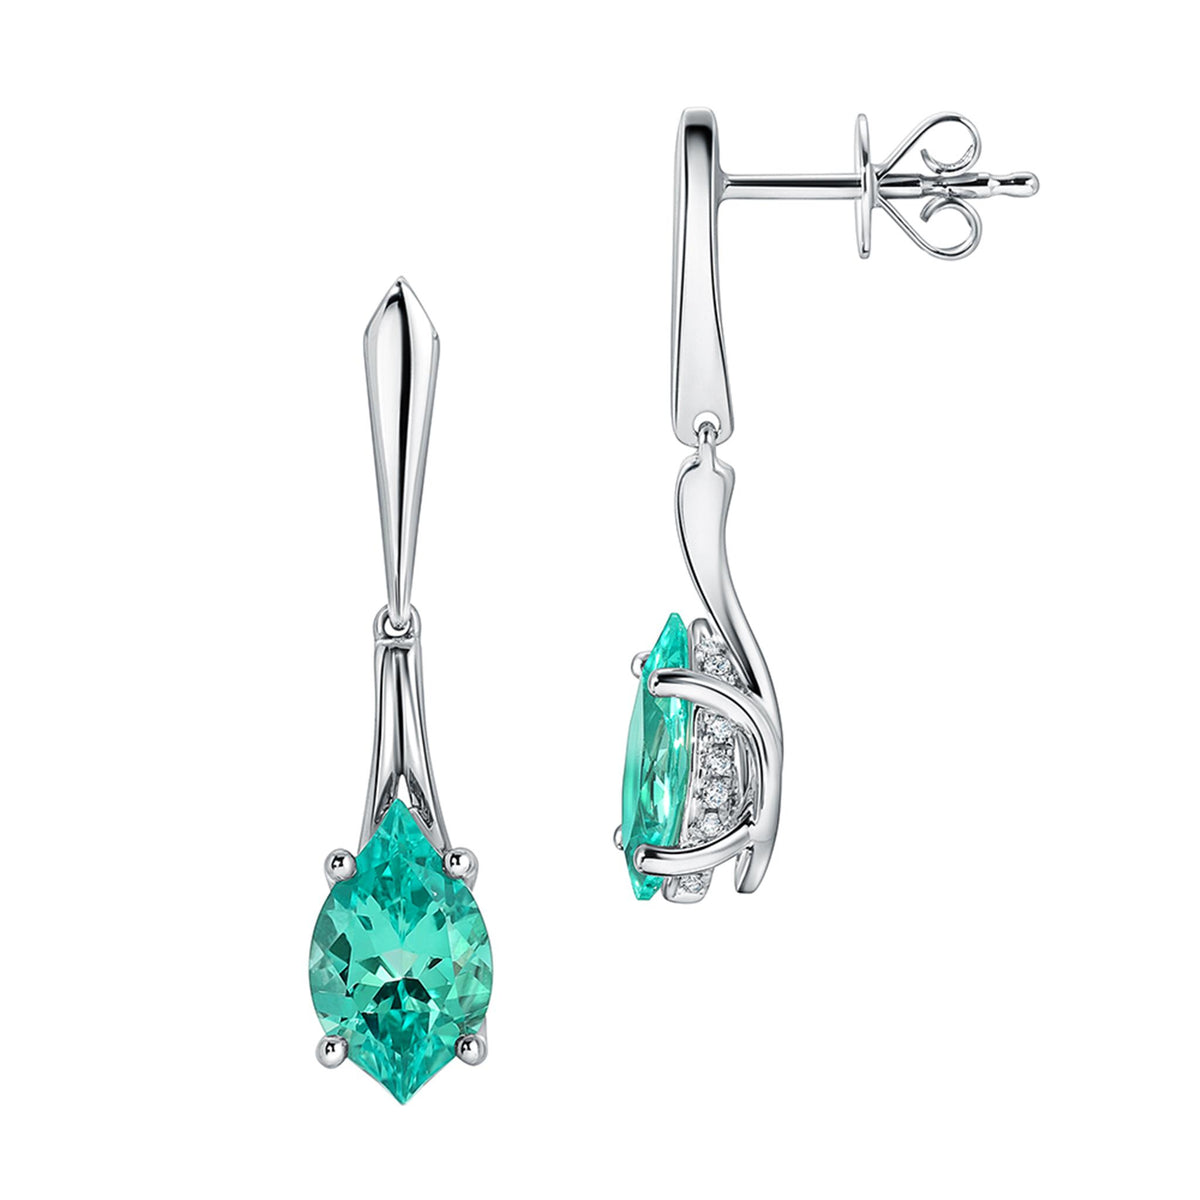 14Kt White Gold Dangle Earrings With 3.08ct Chatham Lab Created Chrysoberyl